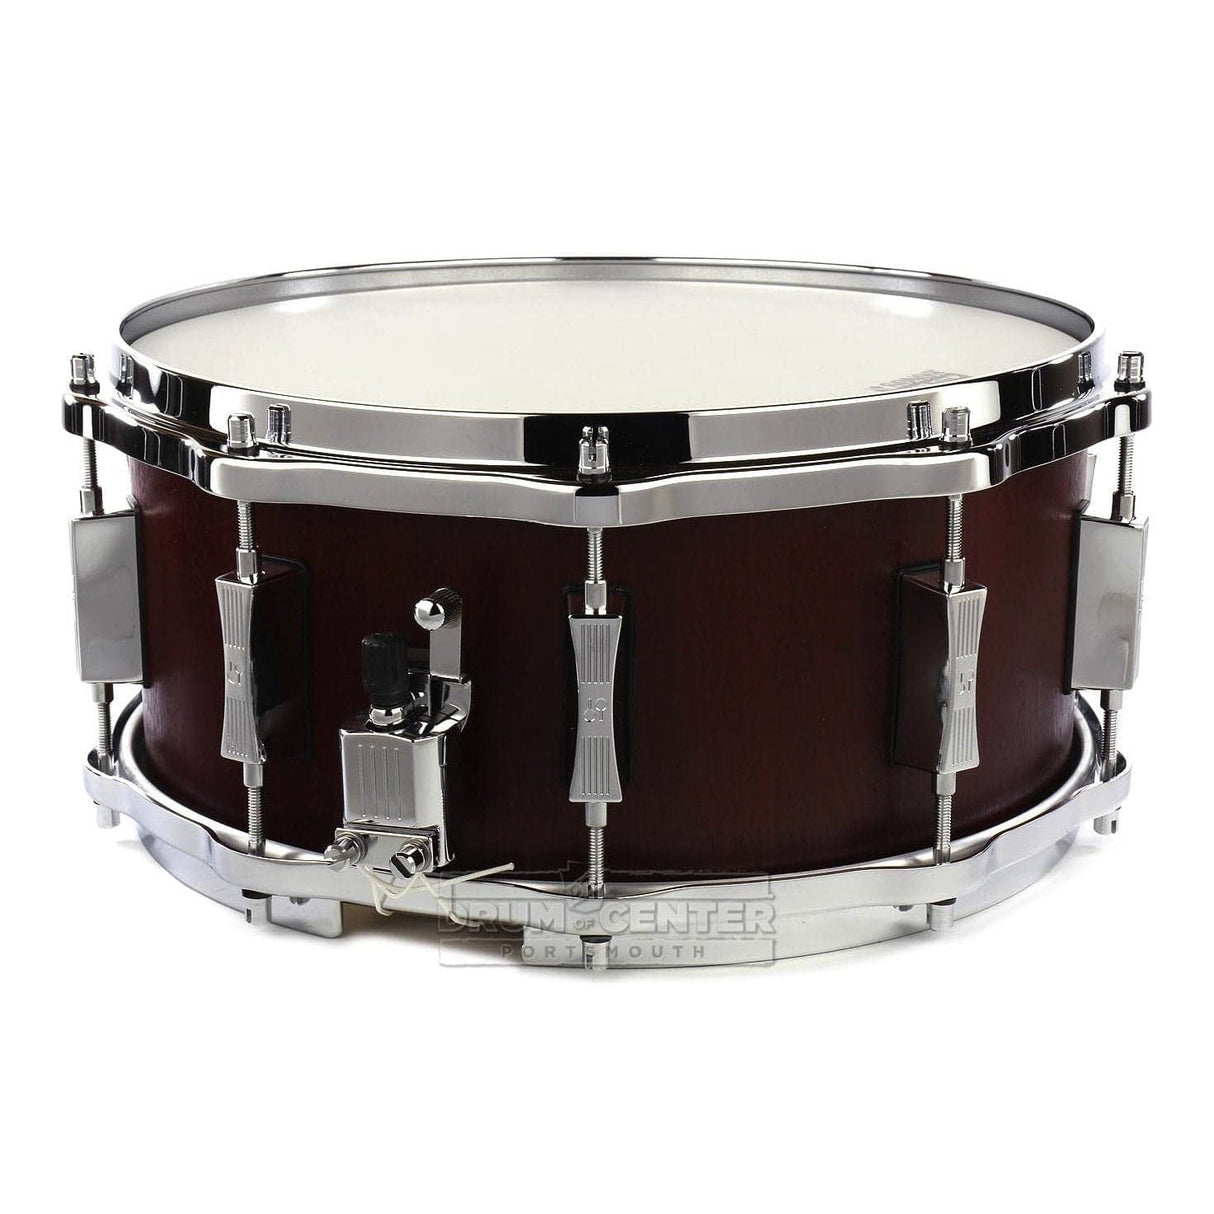 Sonor Phonic Reissue Beech Snare Drum 14x6.5 Mahogany